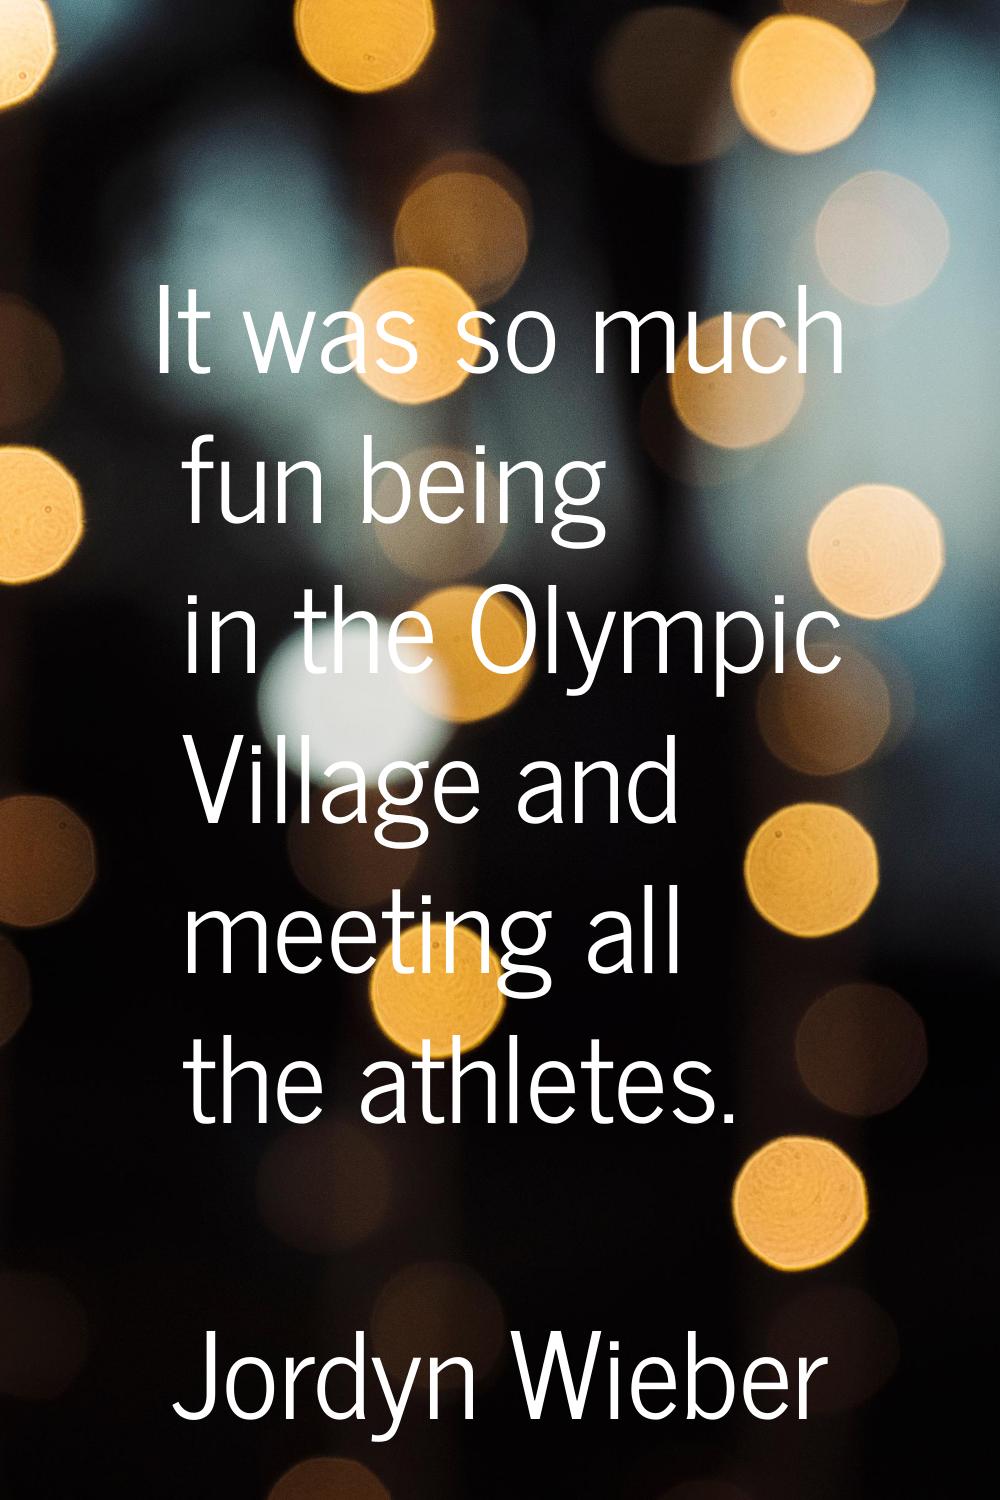 It was so much fun being in the Olympic Village and meeting all the athletes.